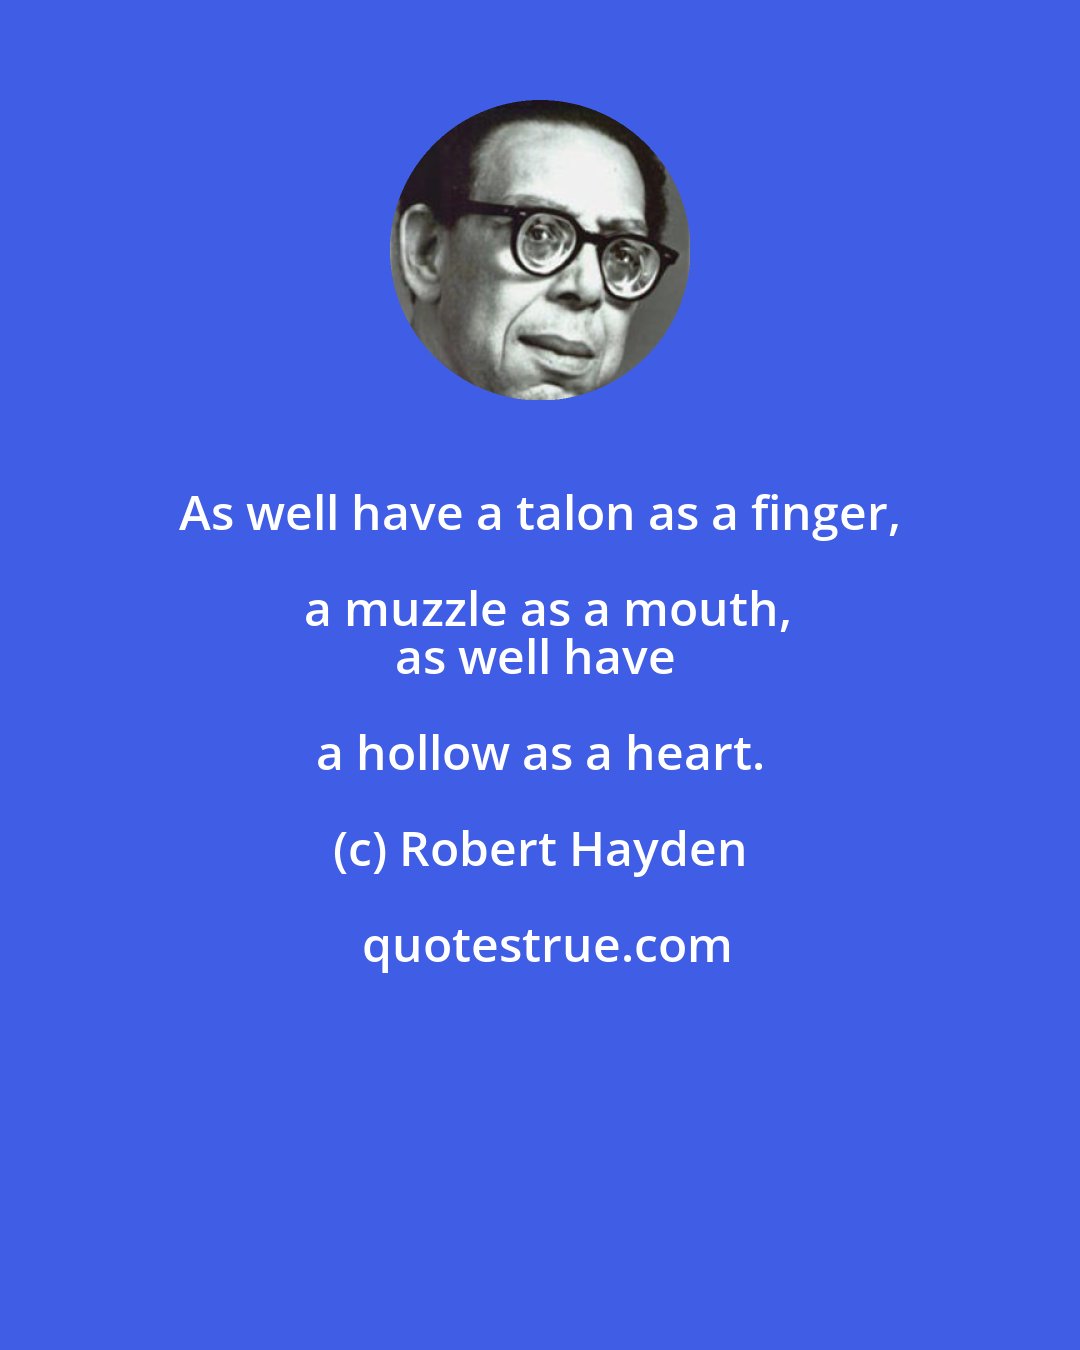 Robert Hayden: As well have a talon as a finger, a muzzle as a mouth,
as well have a hollow as a heart.